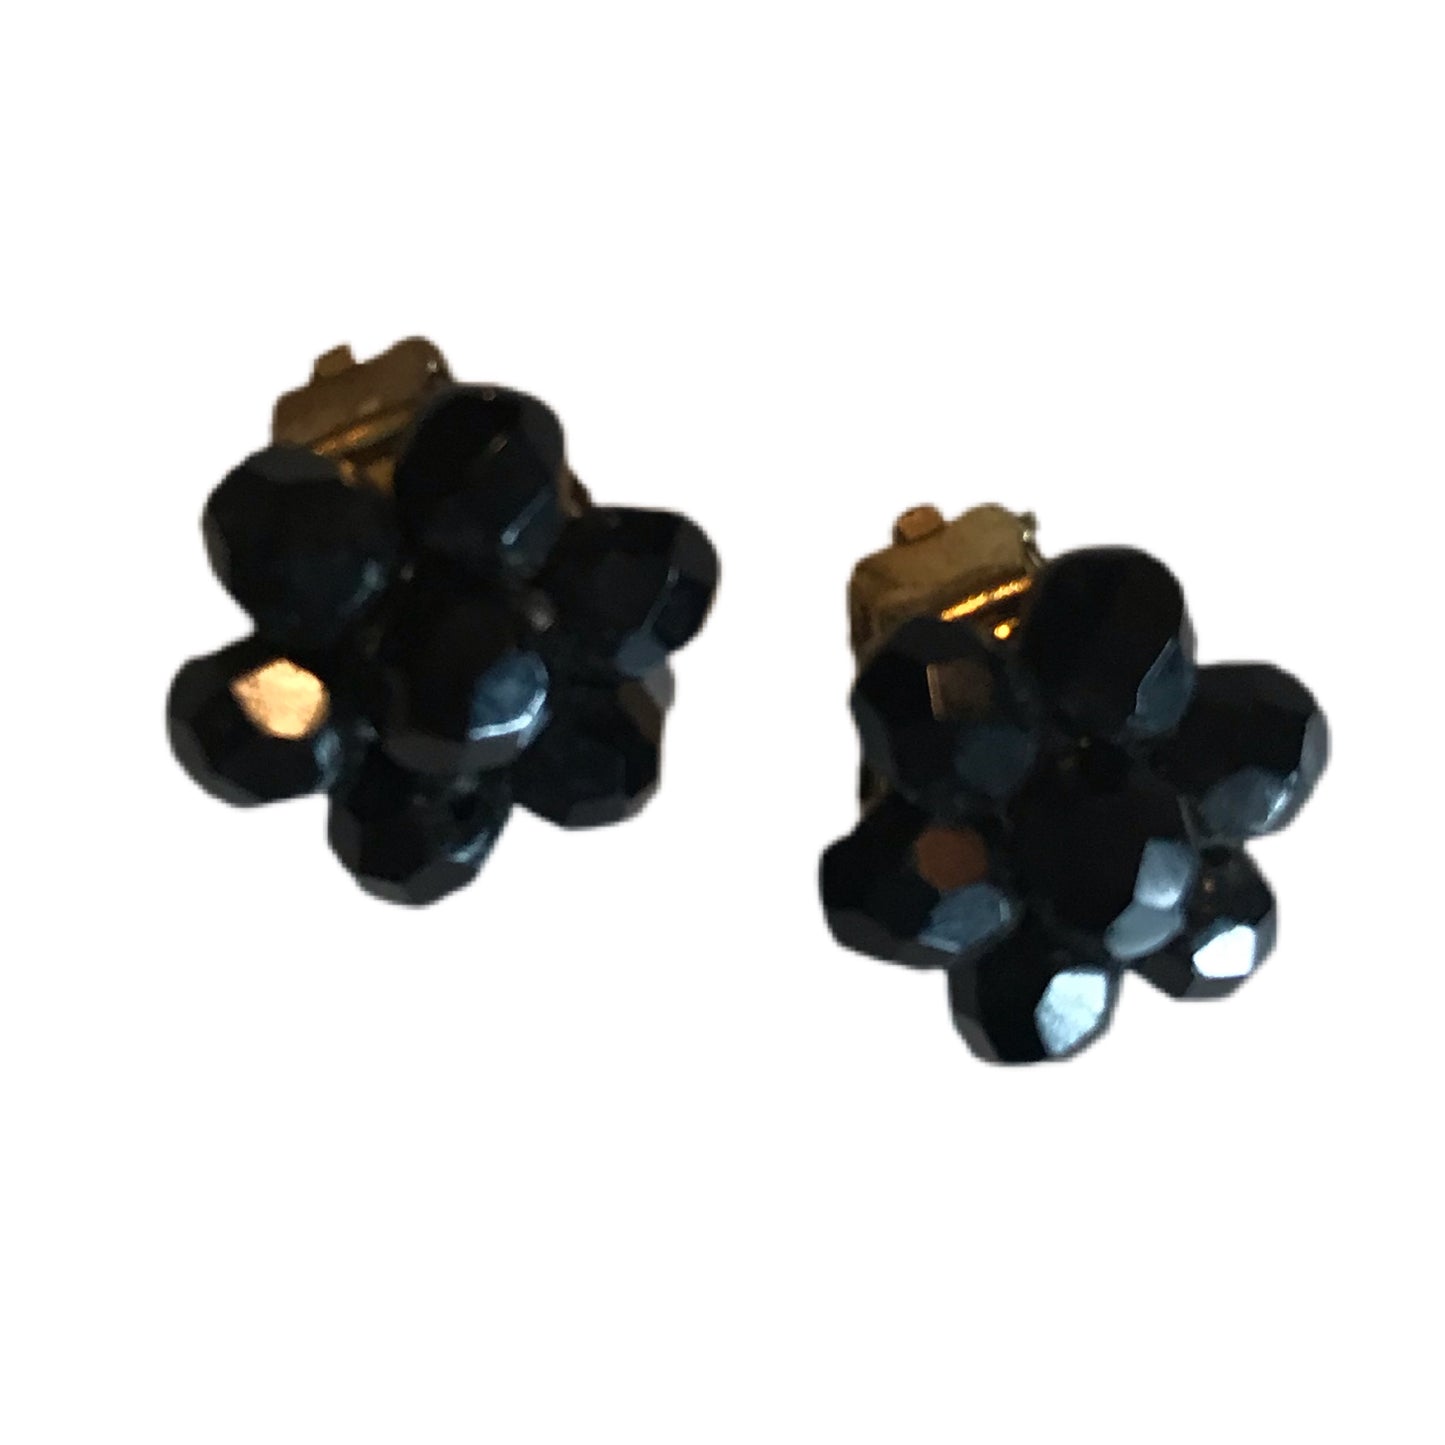 Black Faceted Bead Cluster Clip Earrings circa 1960s